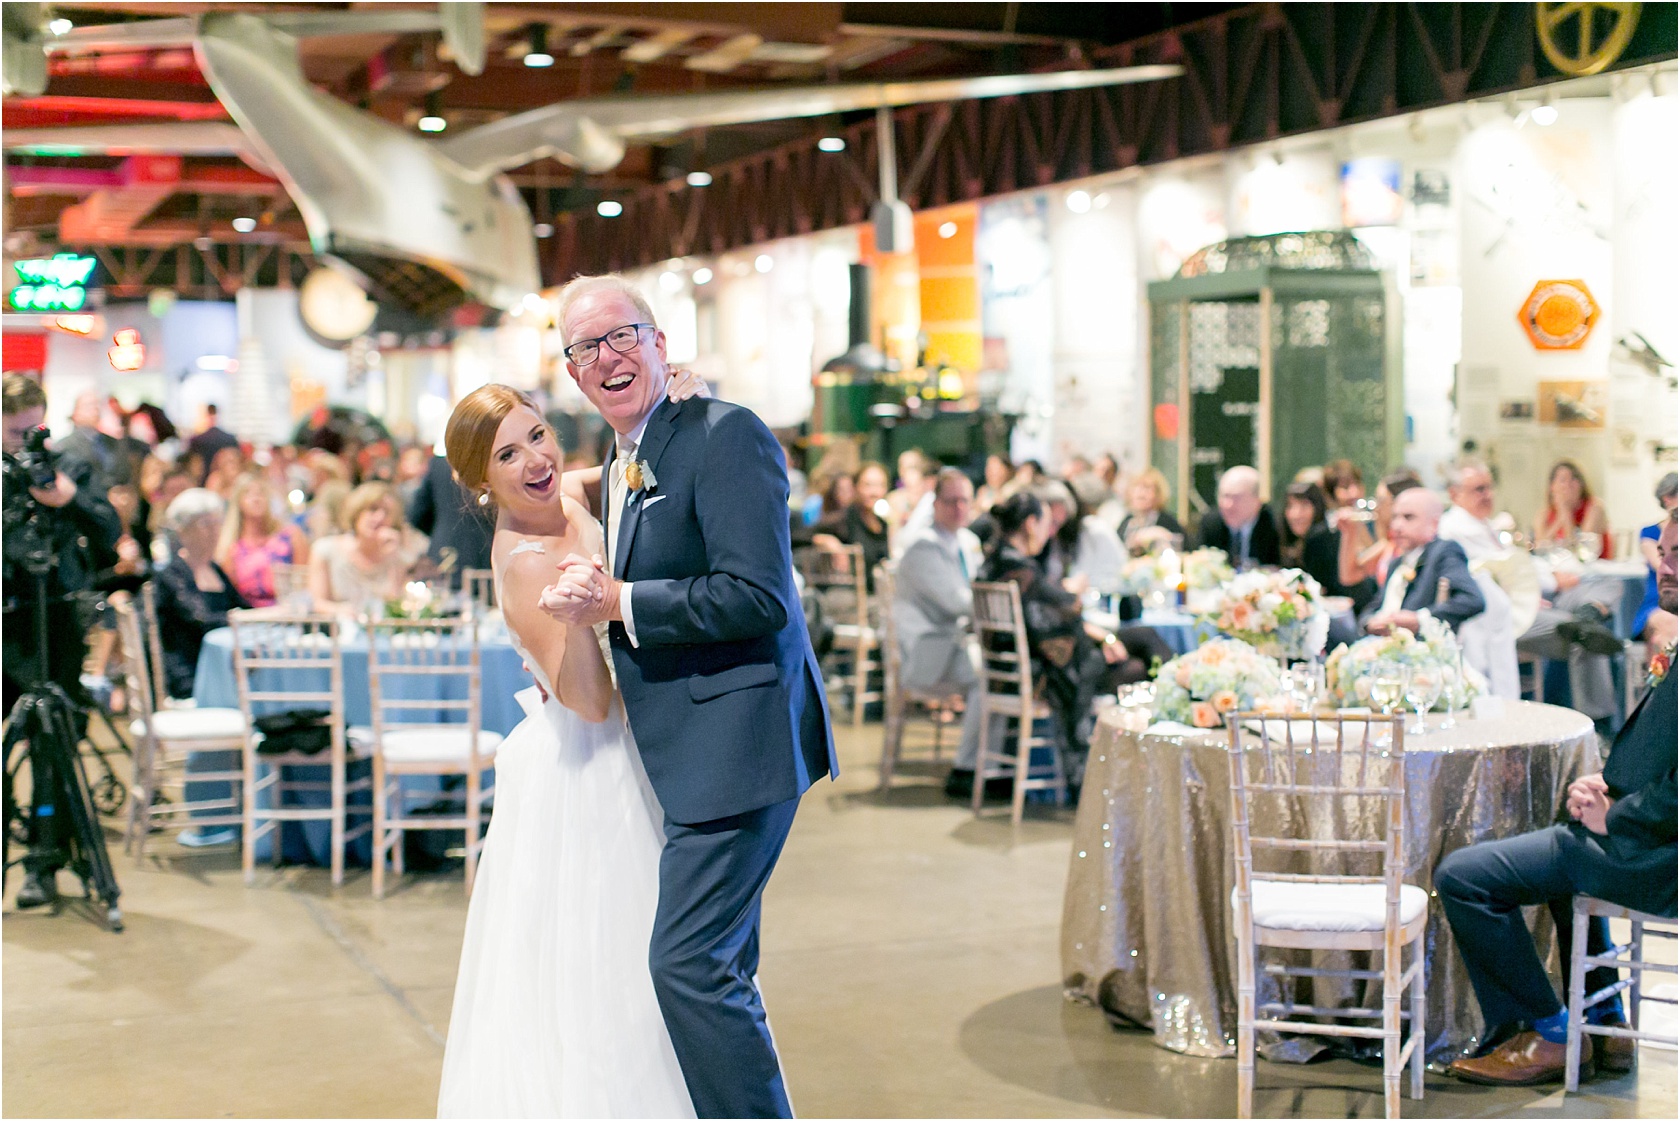 Rowland Baltimore Museum of Industry Wedding Living Radiant Photography photos_0151.jpg